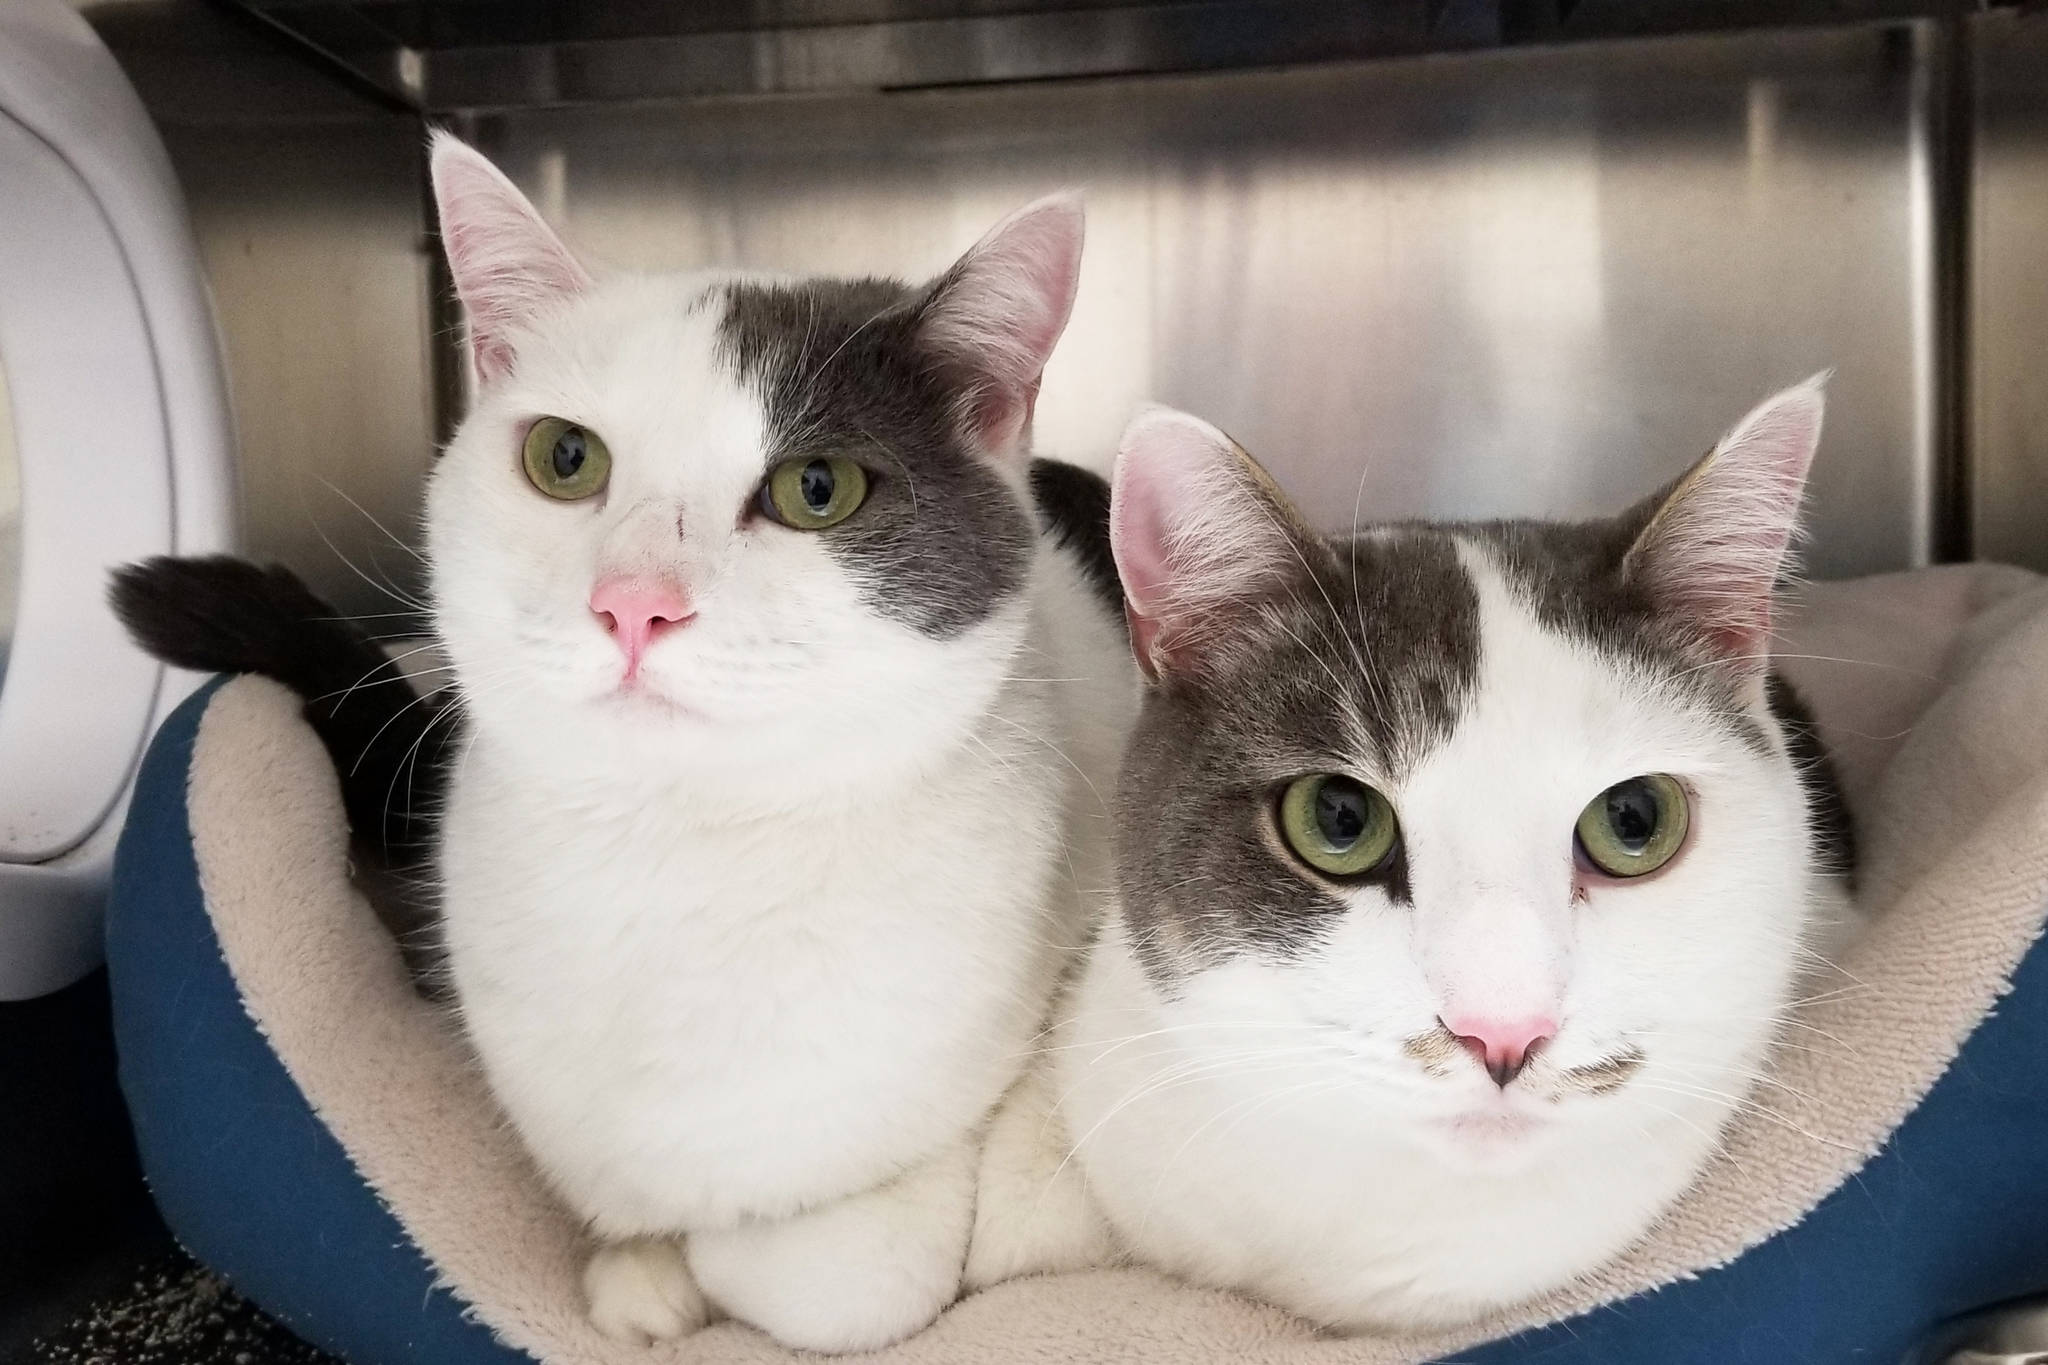 Pets of the Week: Cling and Clang